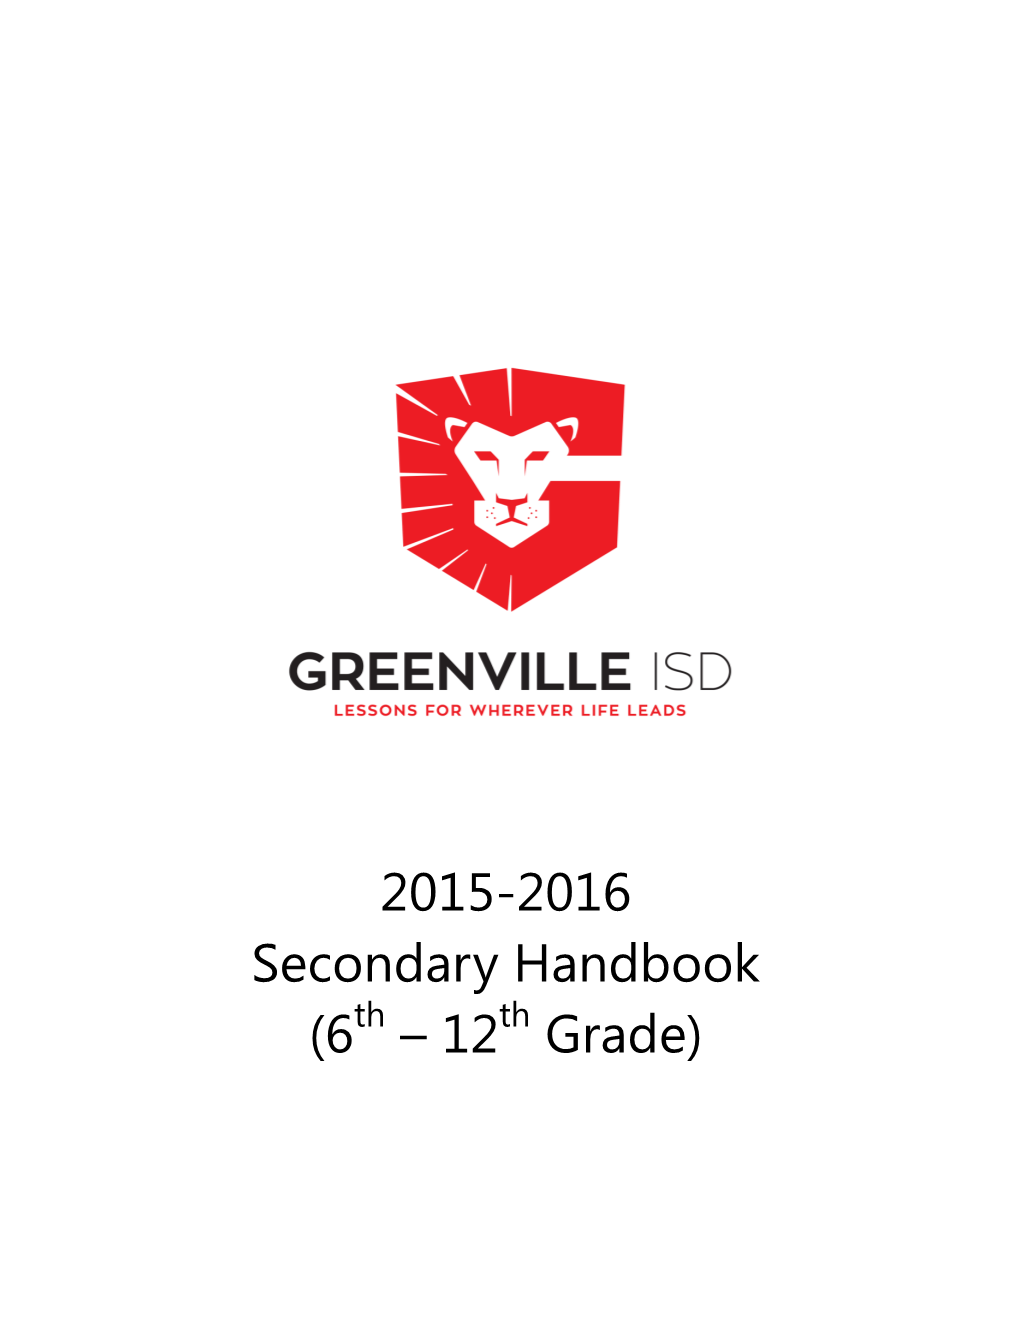 Student Handbook Is Designed to Provide Basic Information That You and Your Child Will Need During the School Year